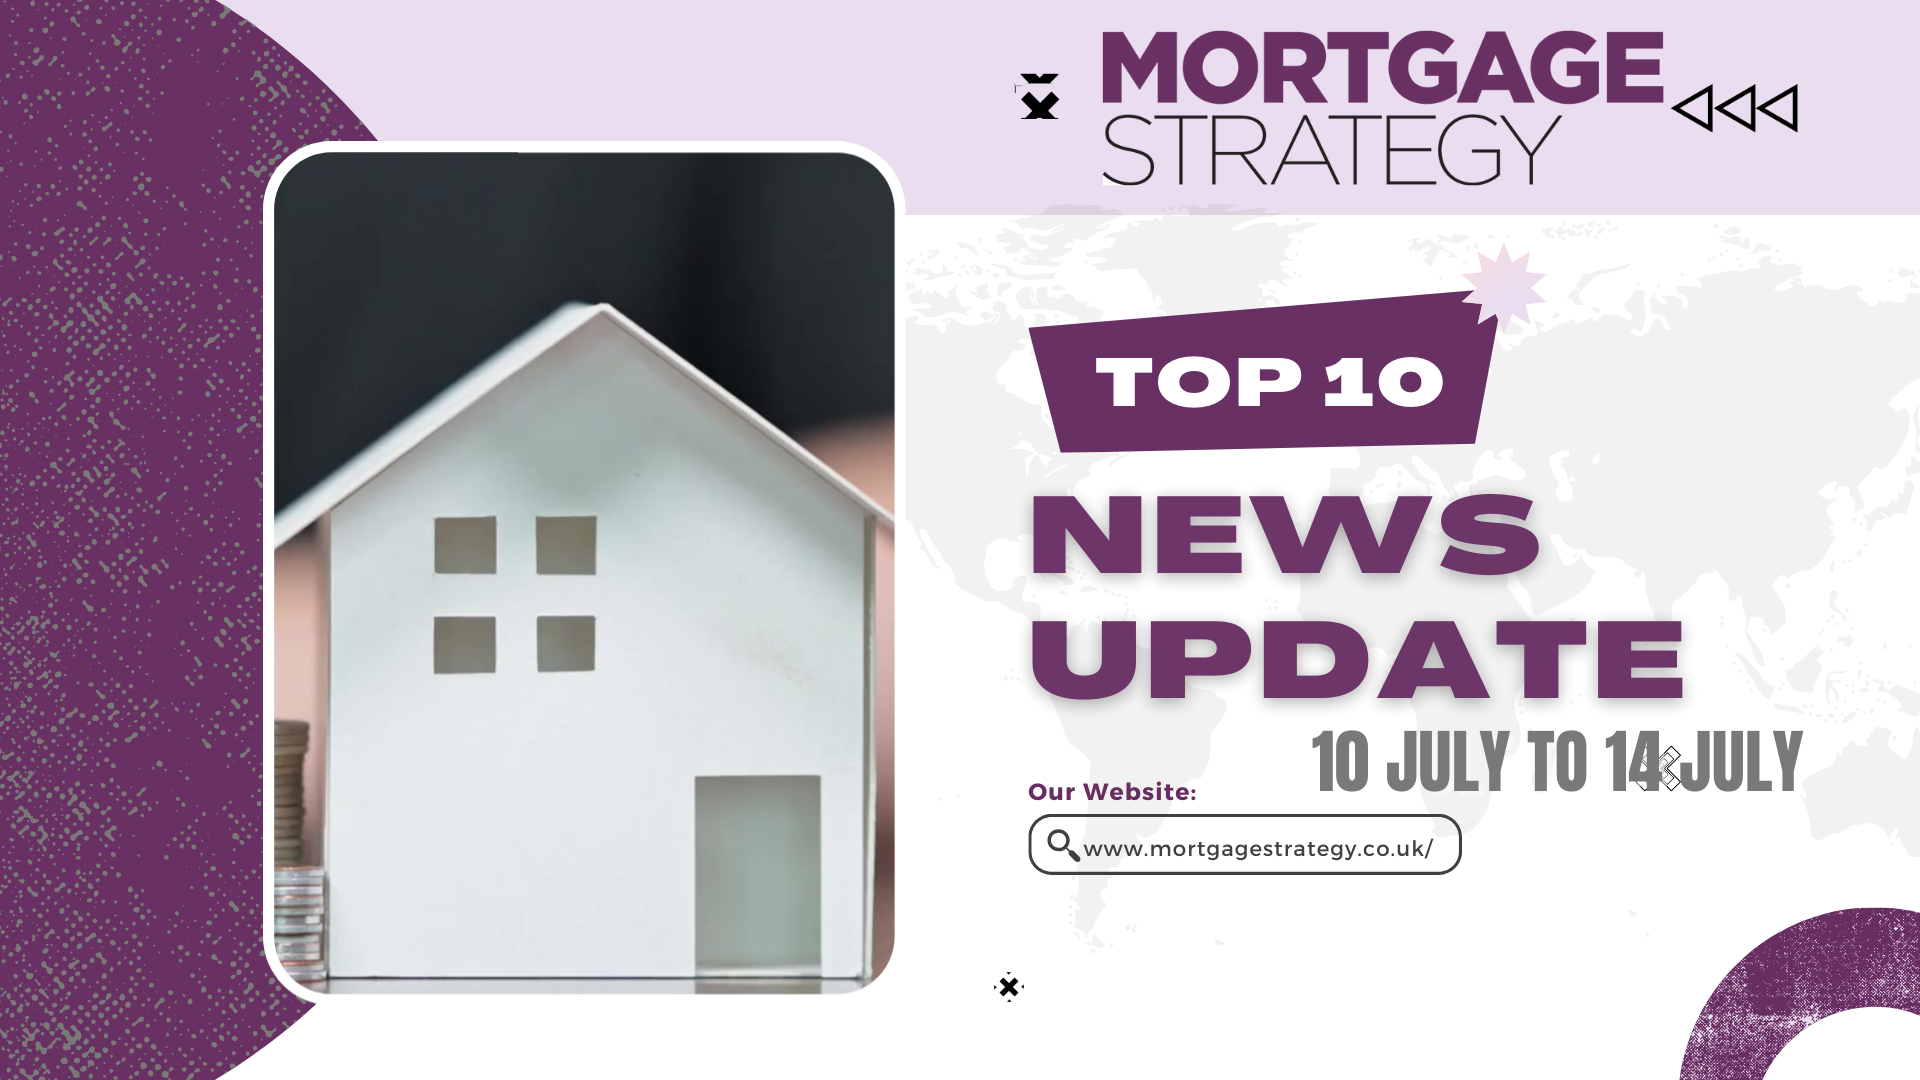 Mortgage-Strategys-Top-10-Stories-10-July-to-14-July.png